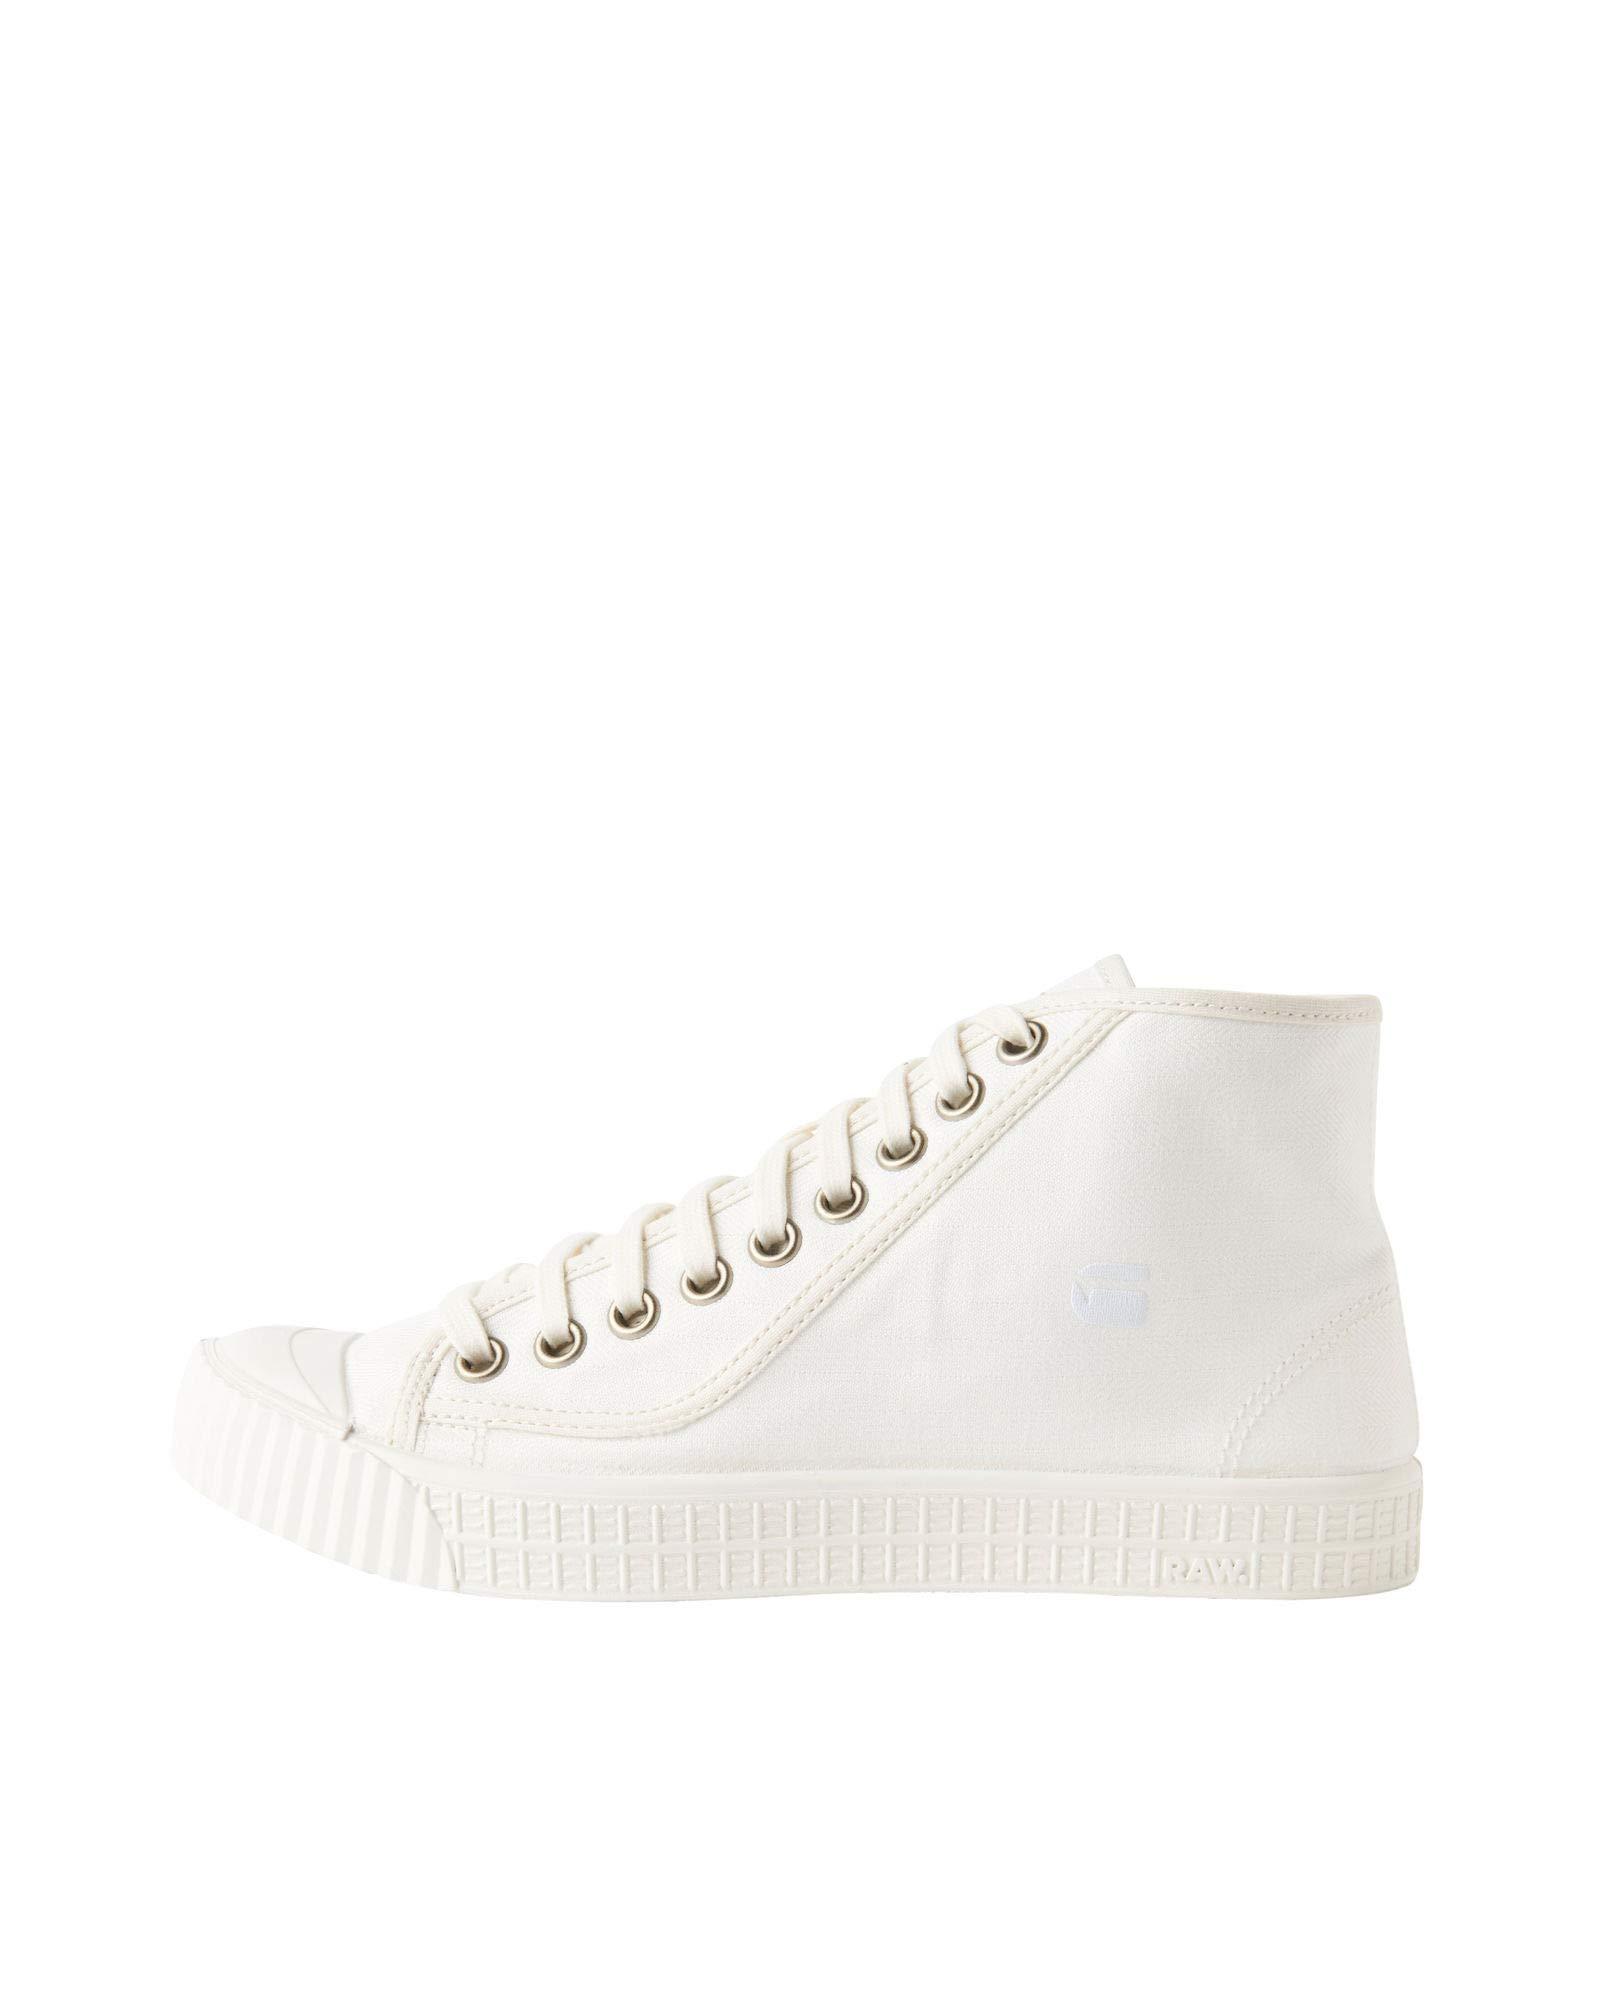 G-Star RAW Denim Rovulc Hb Low Top Sneakers in White for Men | Lyst